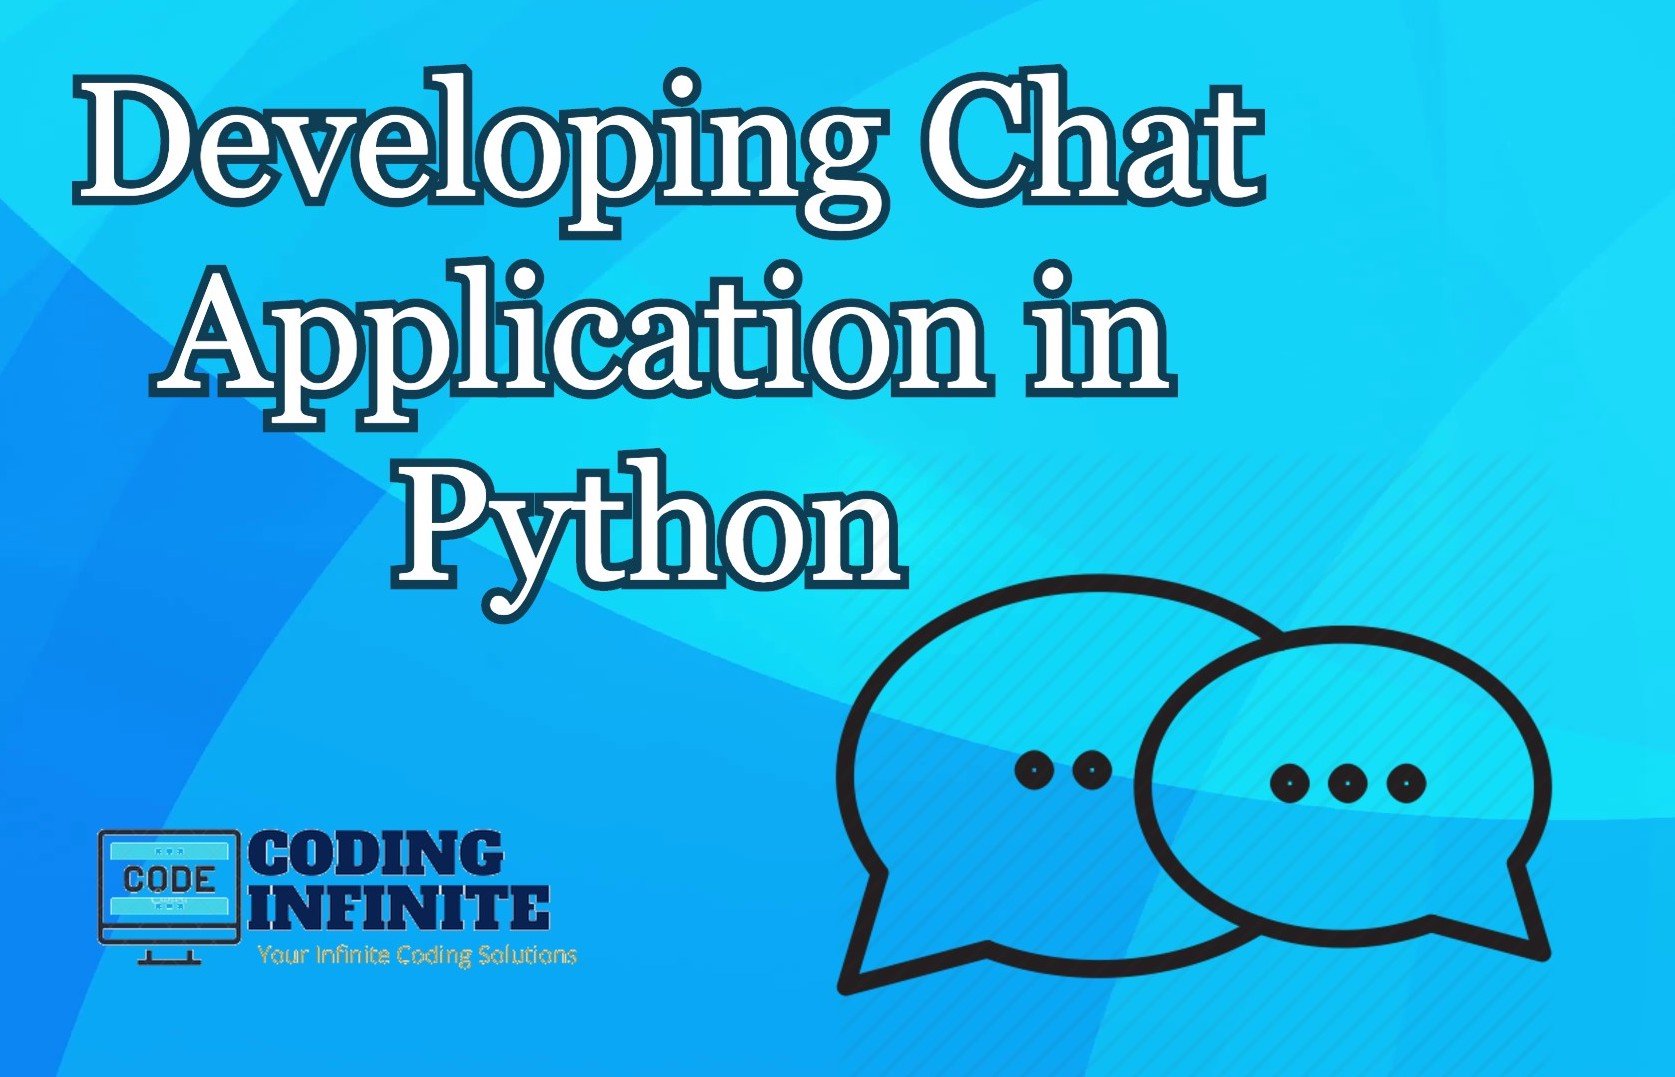 Developing Chat Application in Python with Source Code